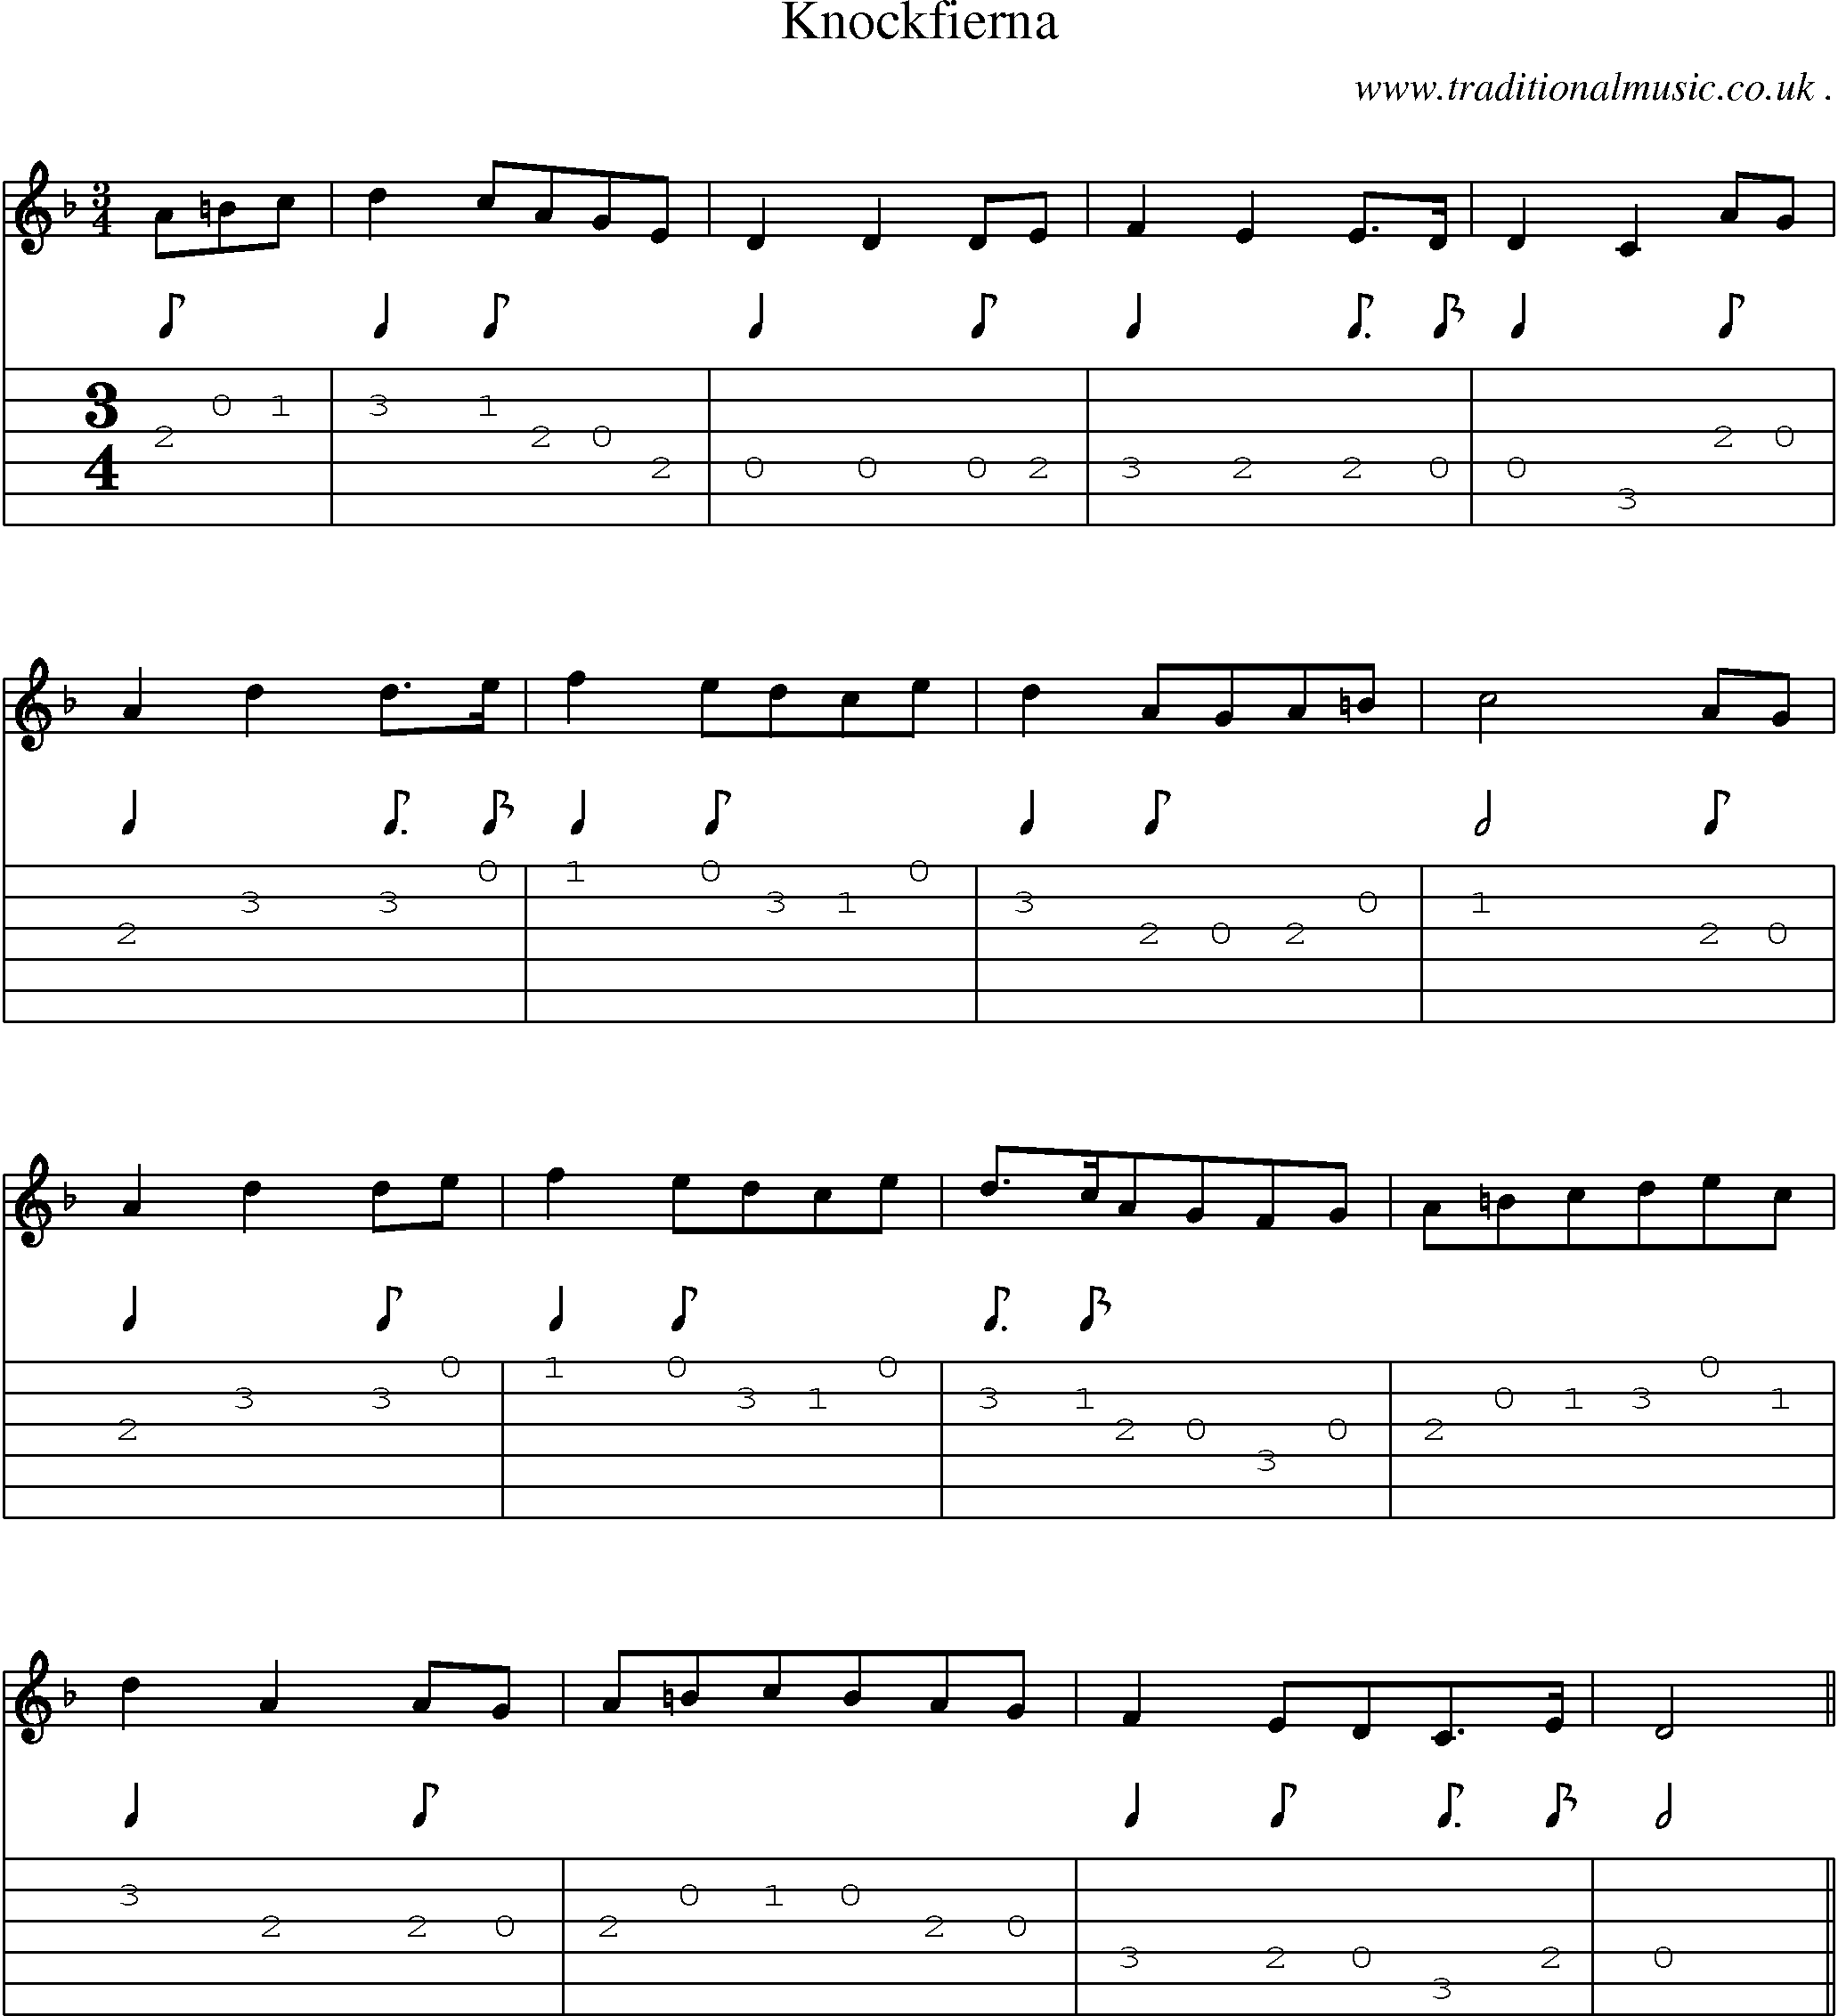 Sheet-Music and Guitar Tabs for Knockfierna